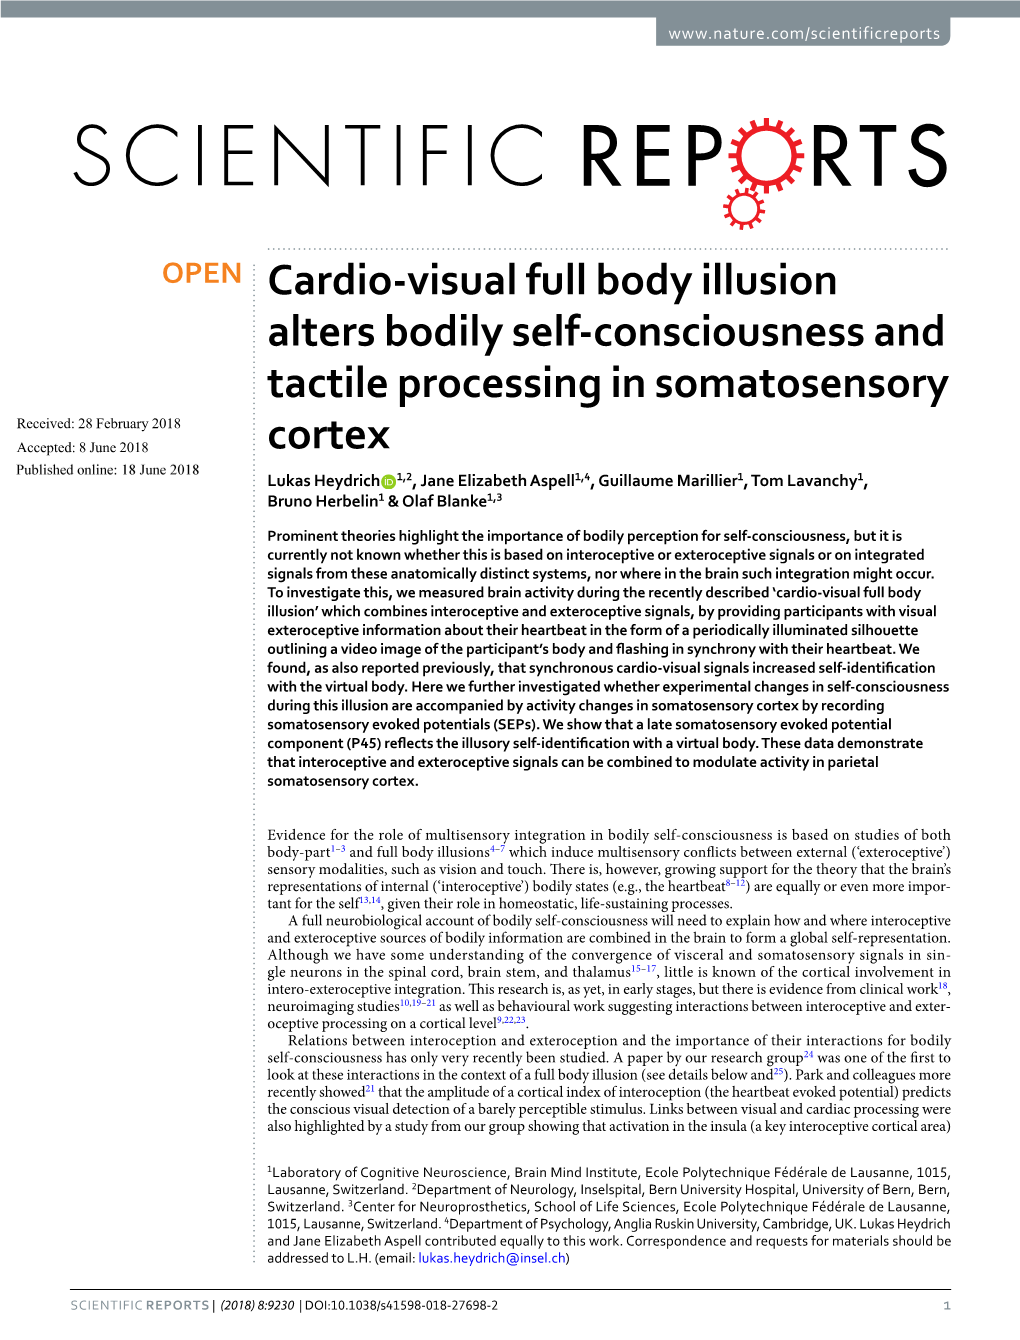 Cardio-Visual Full Body Illusion Alters Bodily Self-Consciousness And